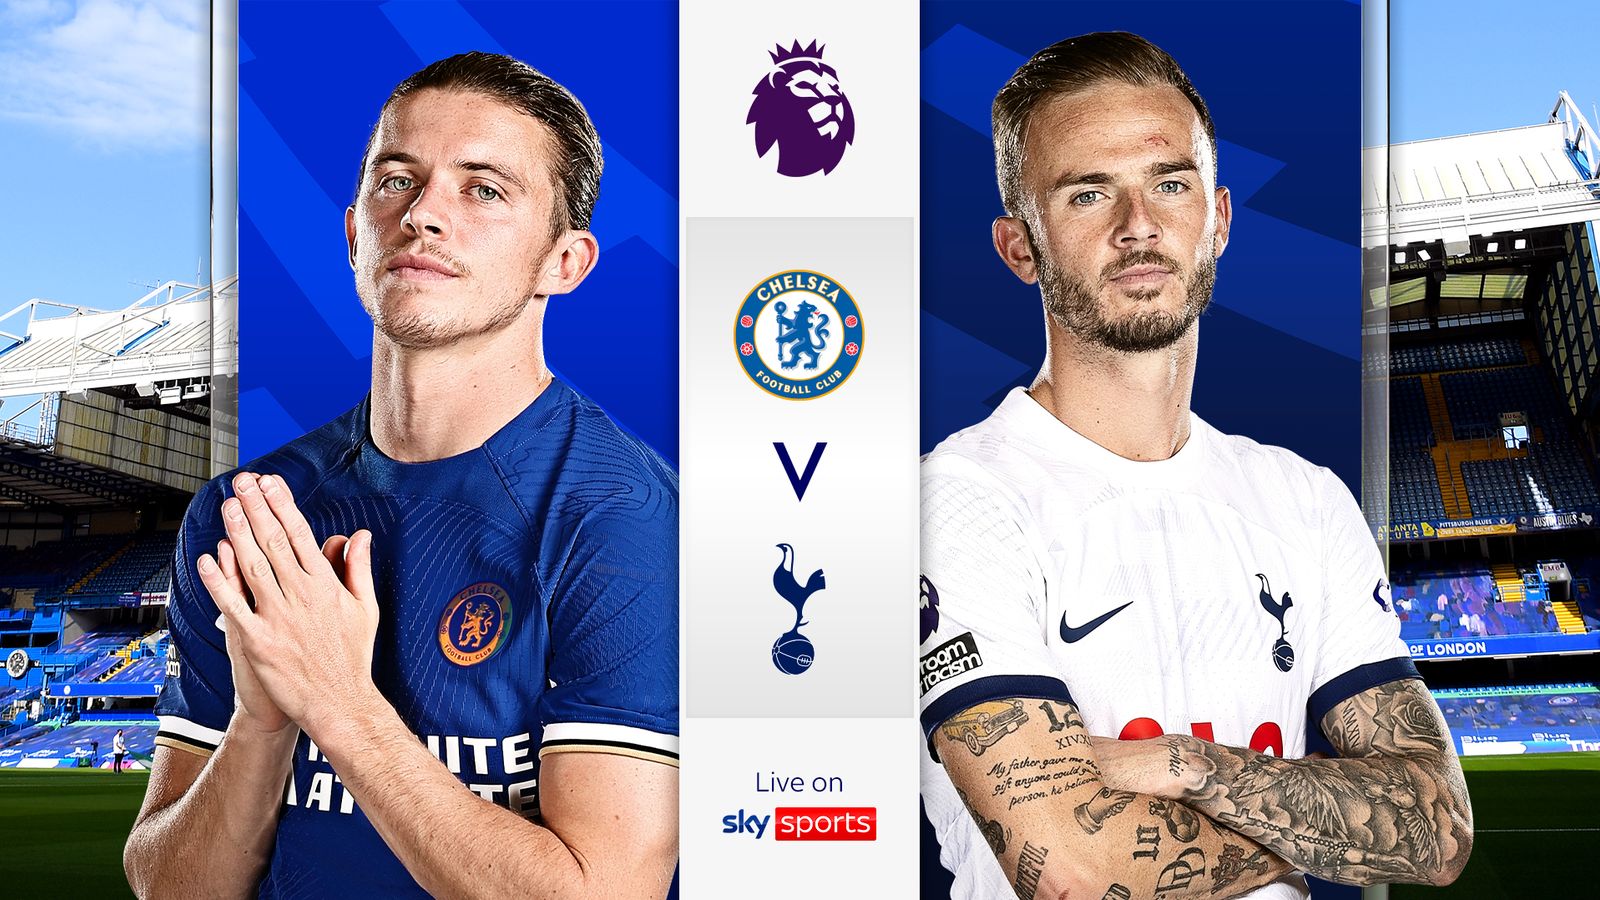 What's live on Sky today? Chelsea host Spurs and Littler returns